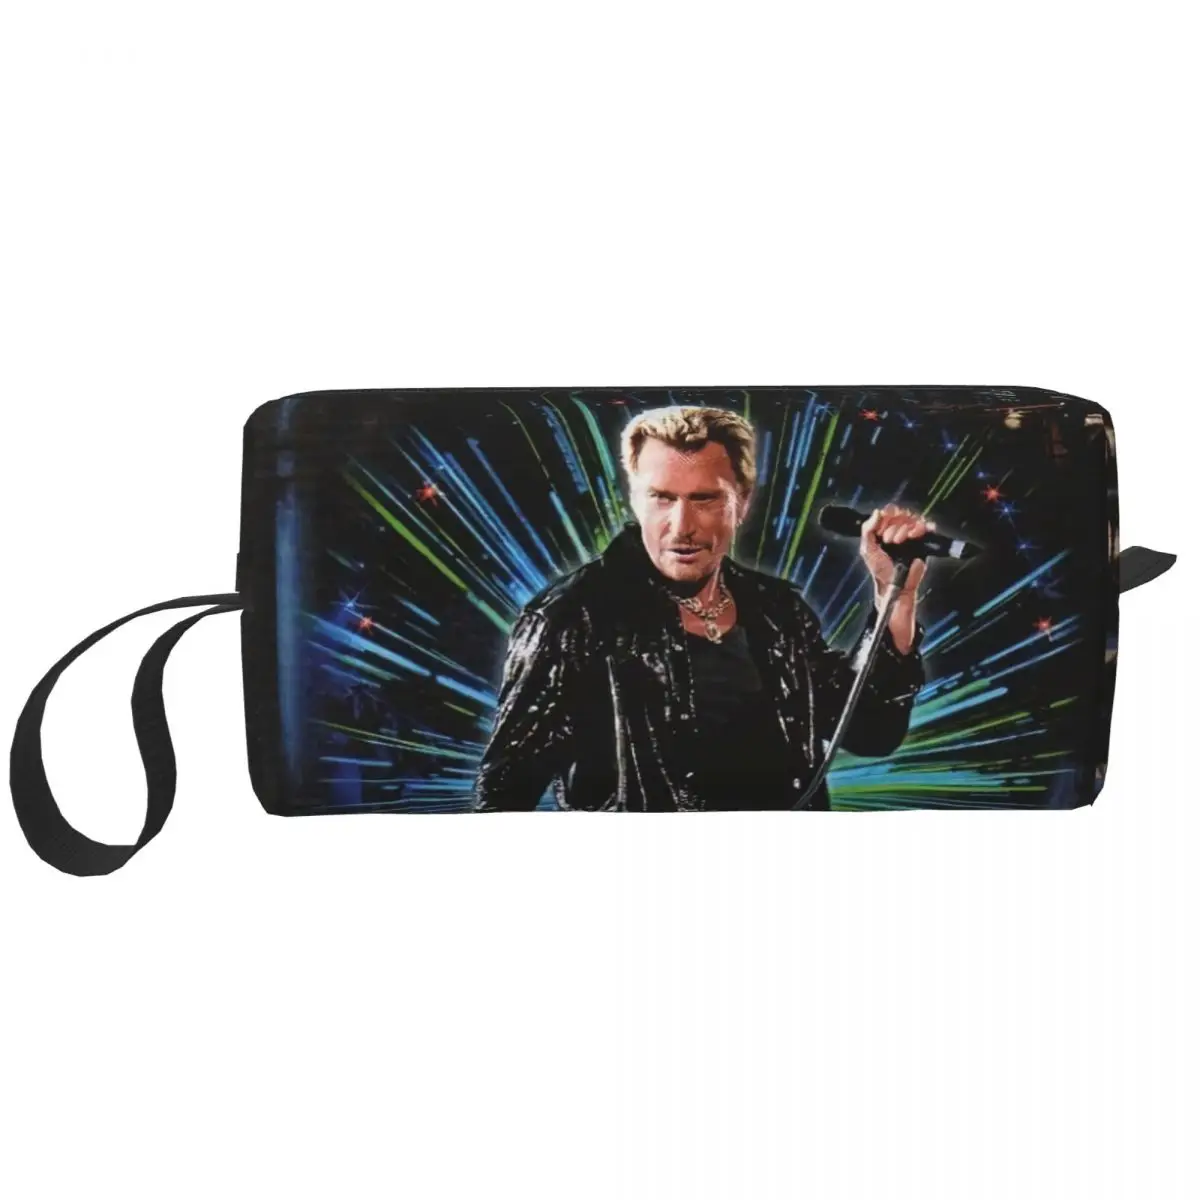 

Johnny Hallyday Rock Travel Cosmetic Bag for Women Singer French France Makeup Toiletry Organizer Lady Beauty Storage Dopp Kit